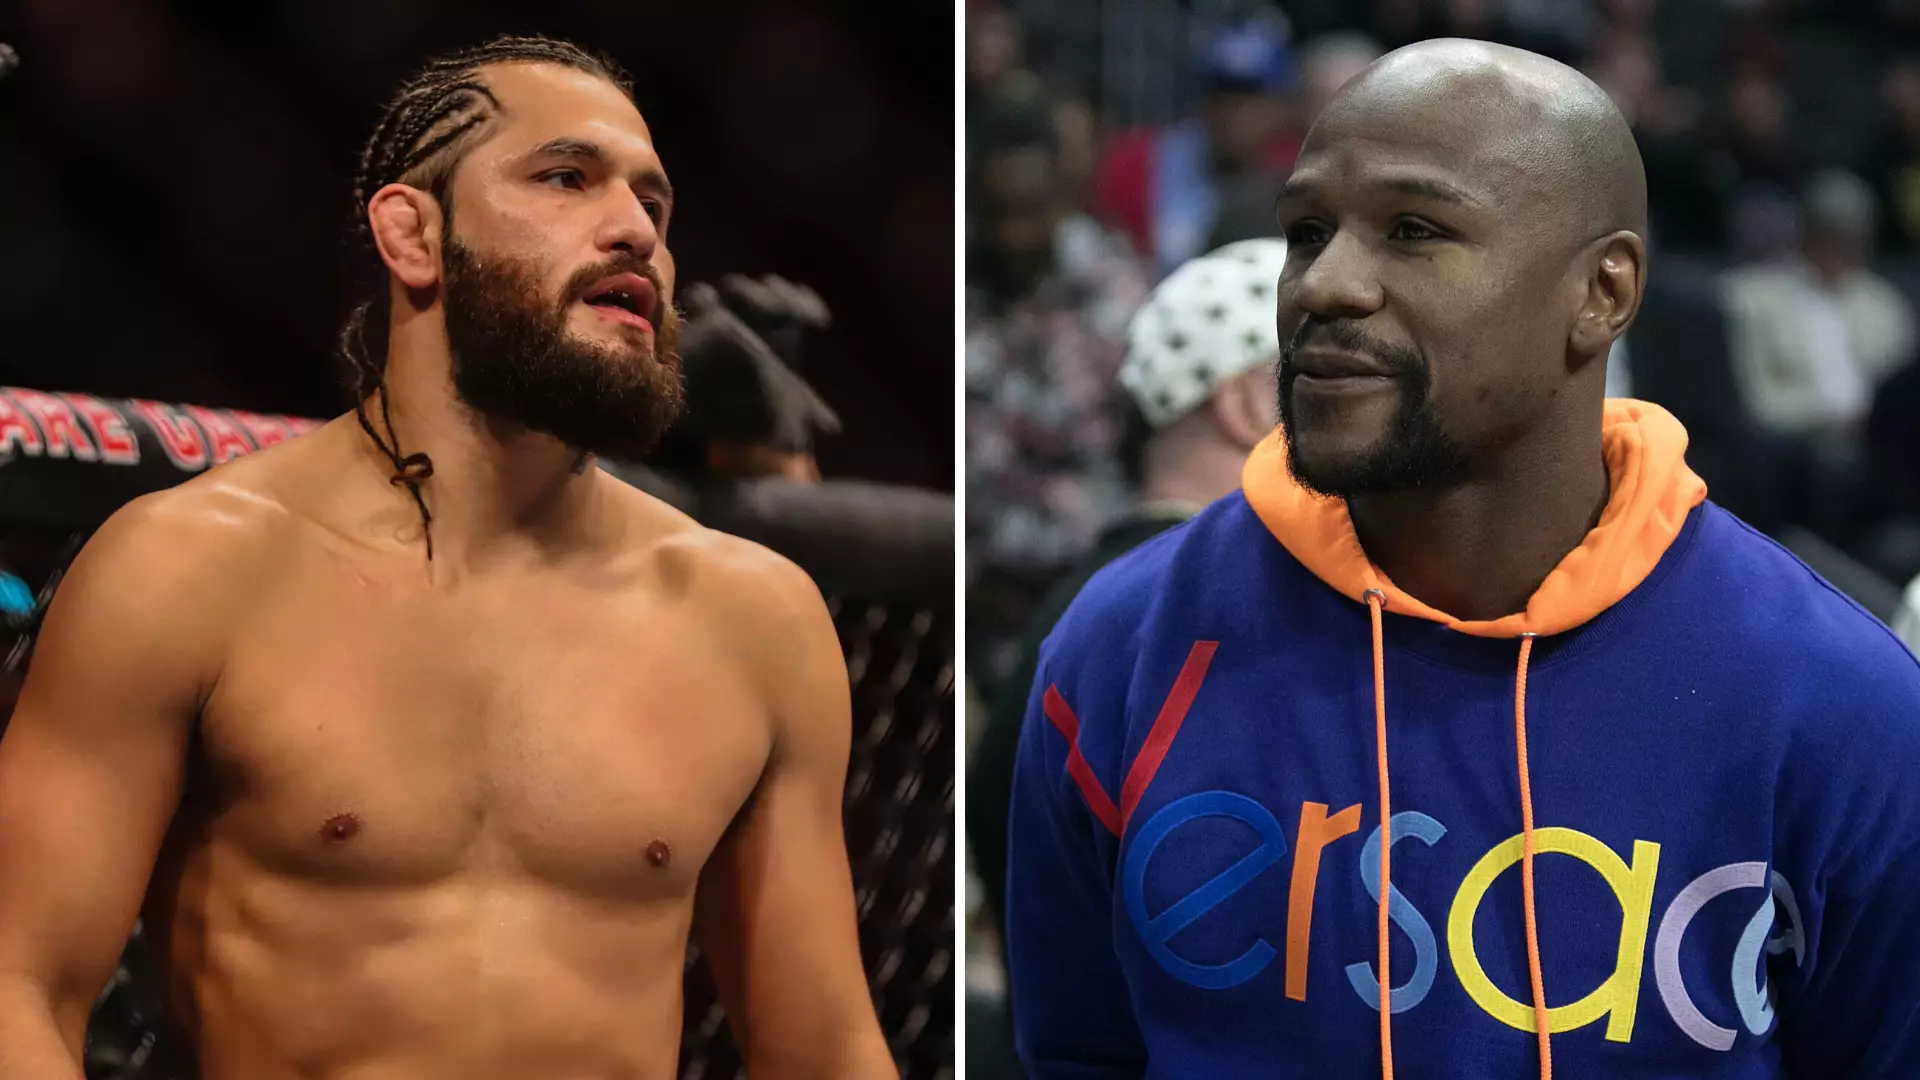 Jorge Masvidal Calls Out Floyd Mayweather For A Crossover Fight In Zuffa Boxing